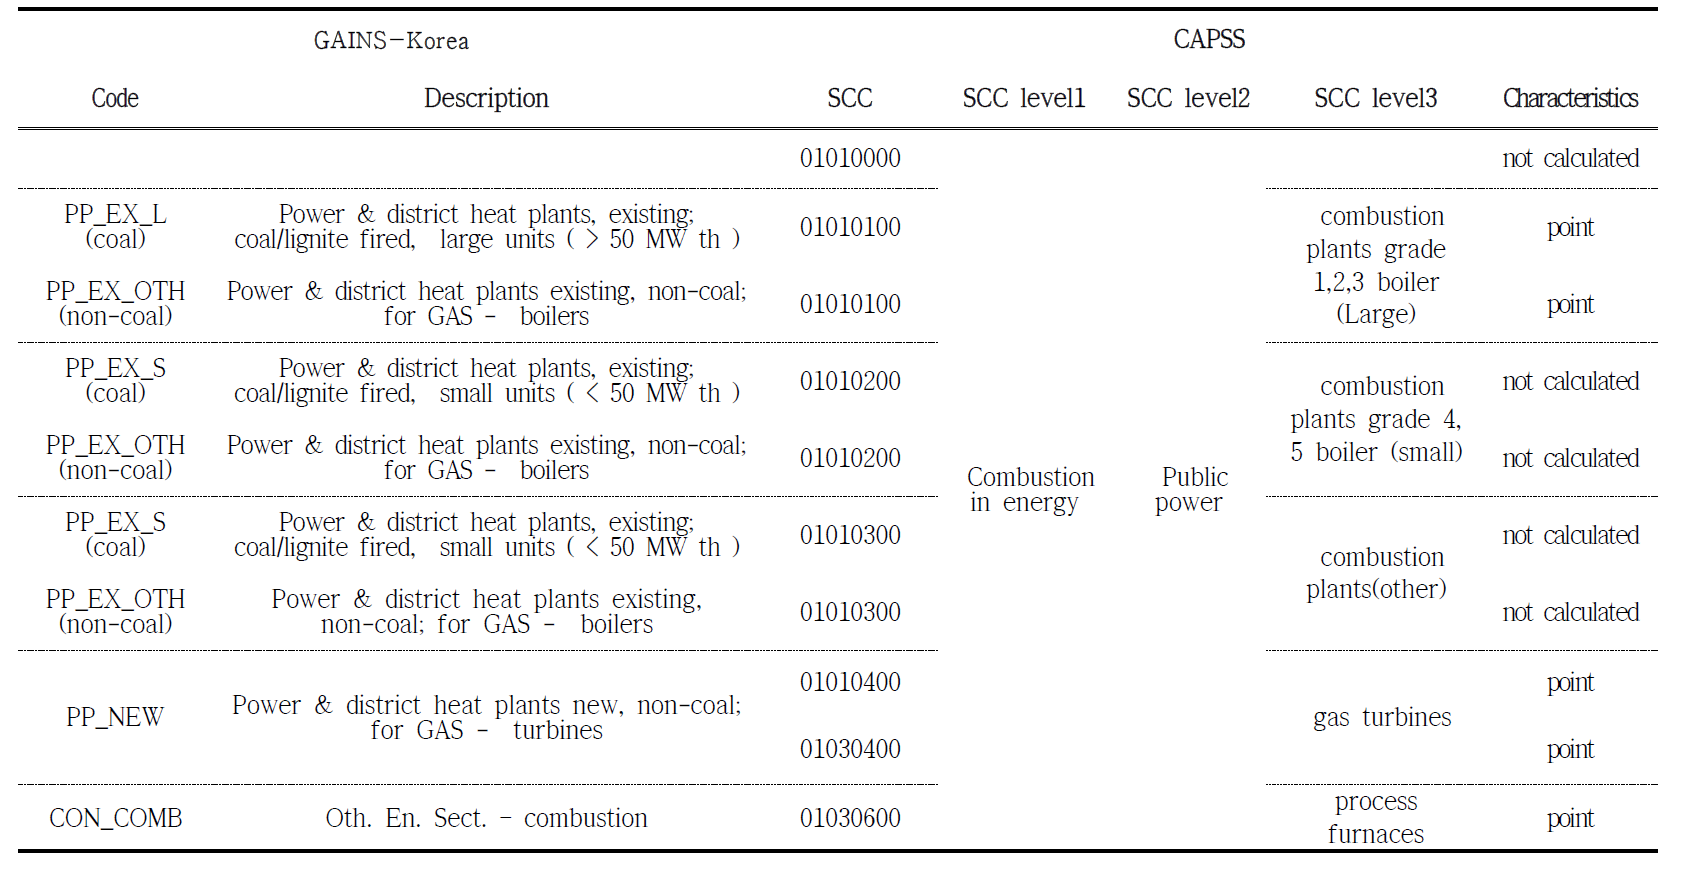 Example of mapping table of source and fuel classification between CAPSS and GAINS systems for power plant sectors.